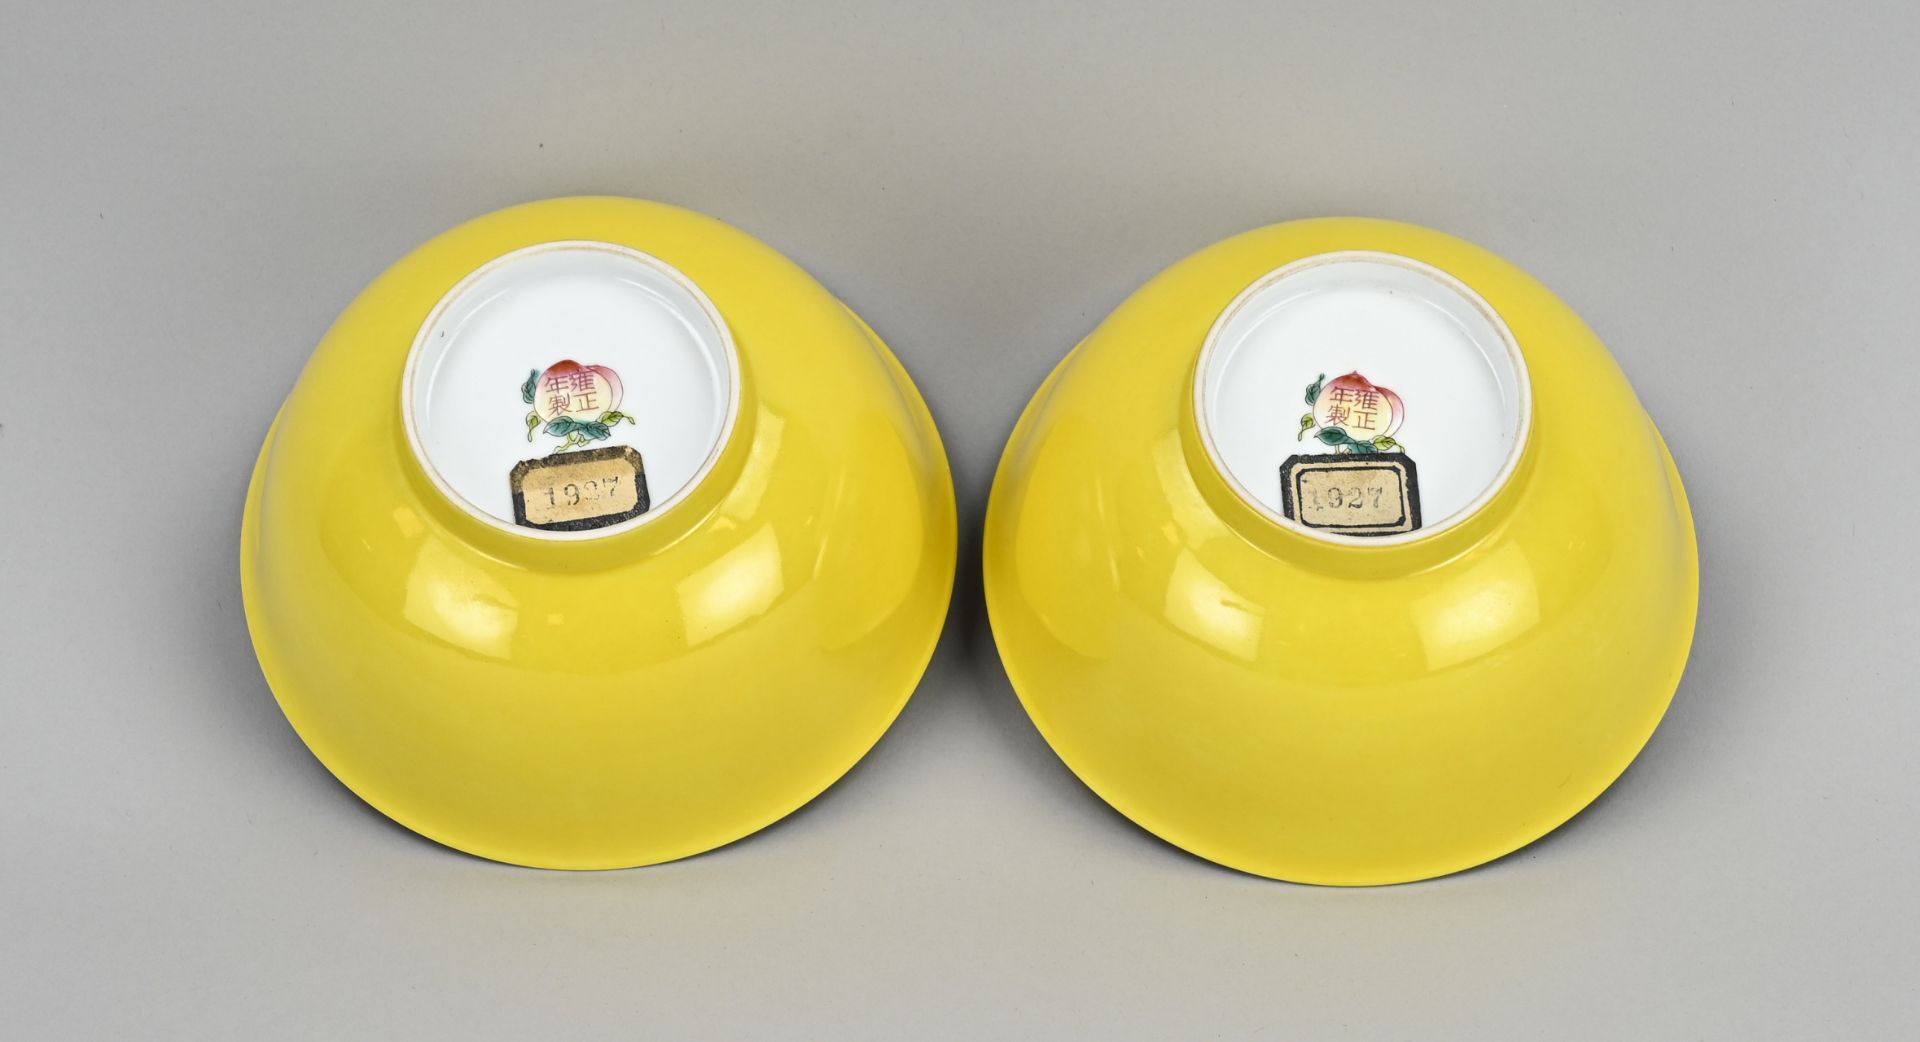 Set of Chinese yellow bowls Ã˜ 15.6 cm. - Image 3 of 3